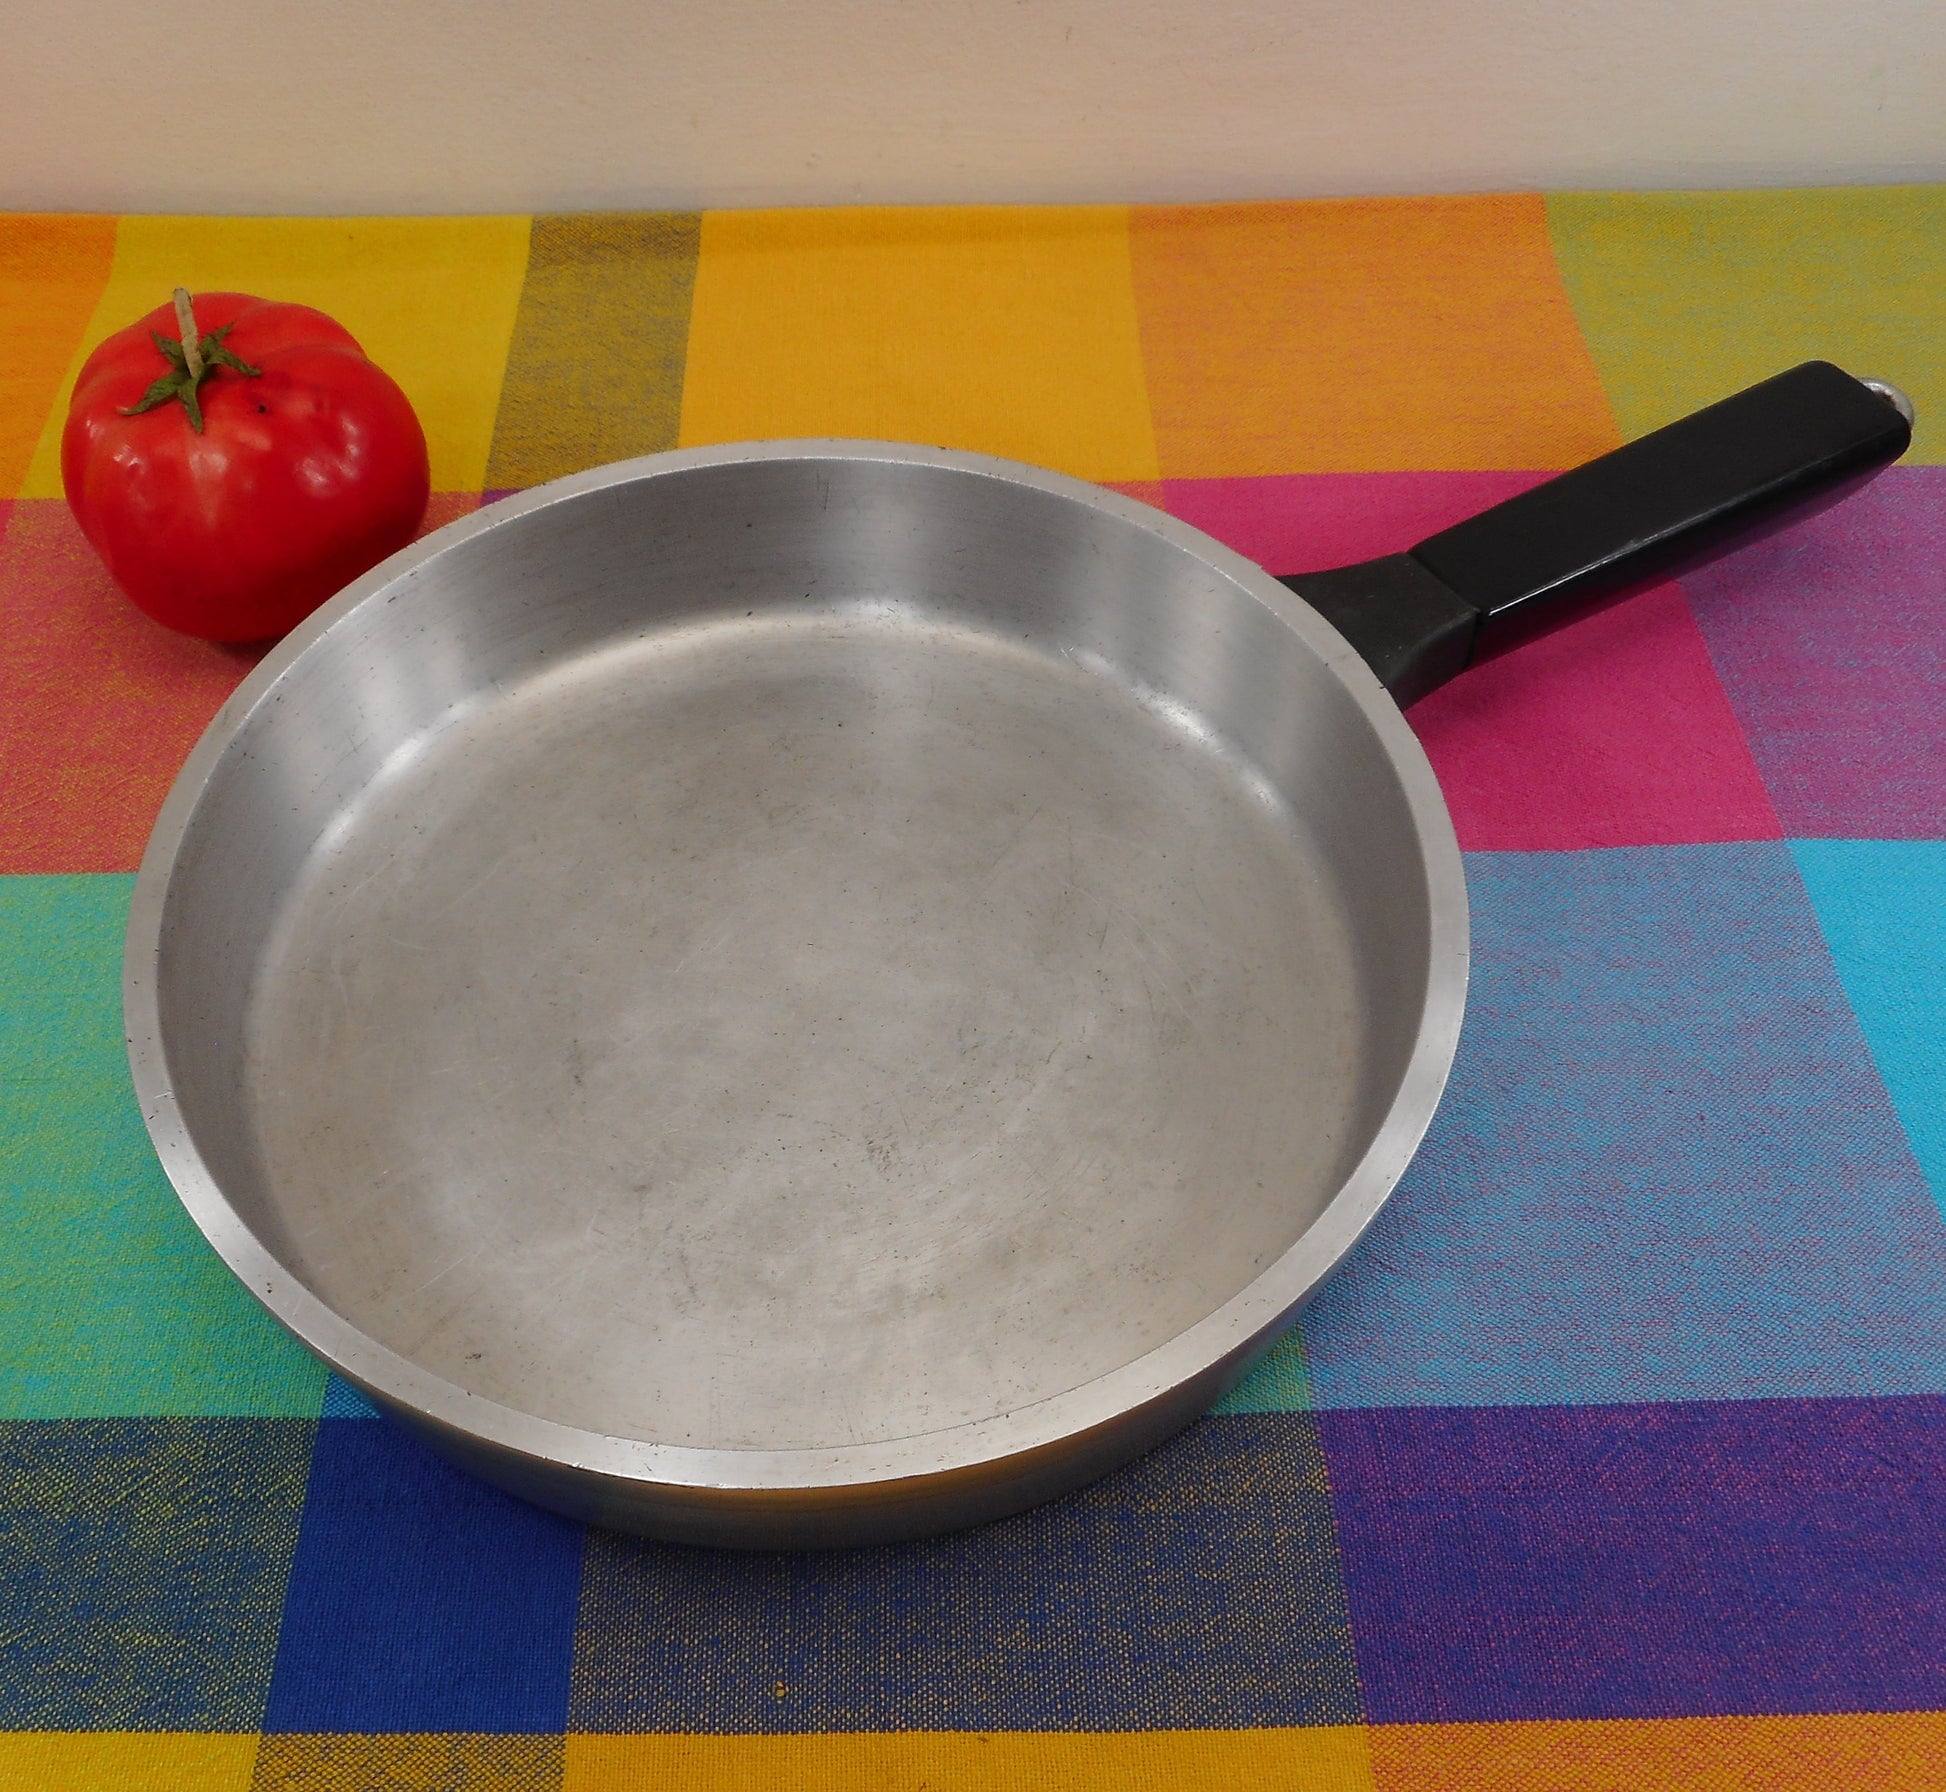 Miracle Maid G2 Cast Advanced Aluminum Cookware - 9" Skillet Fry Pan